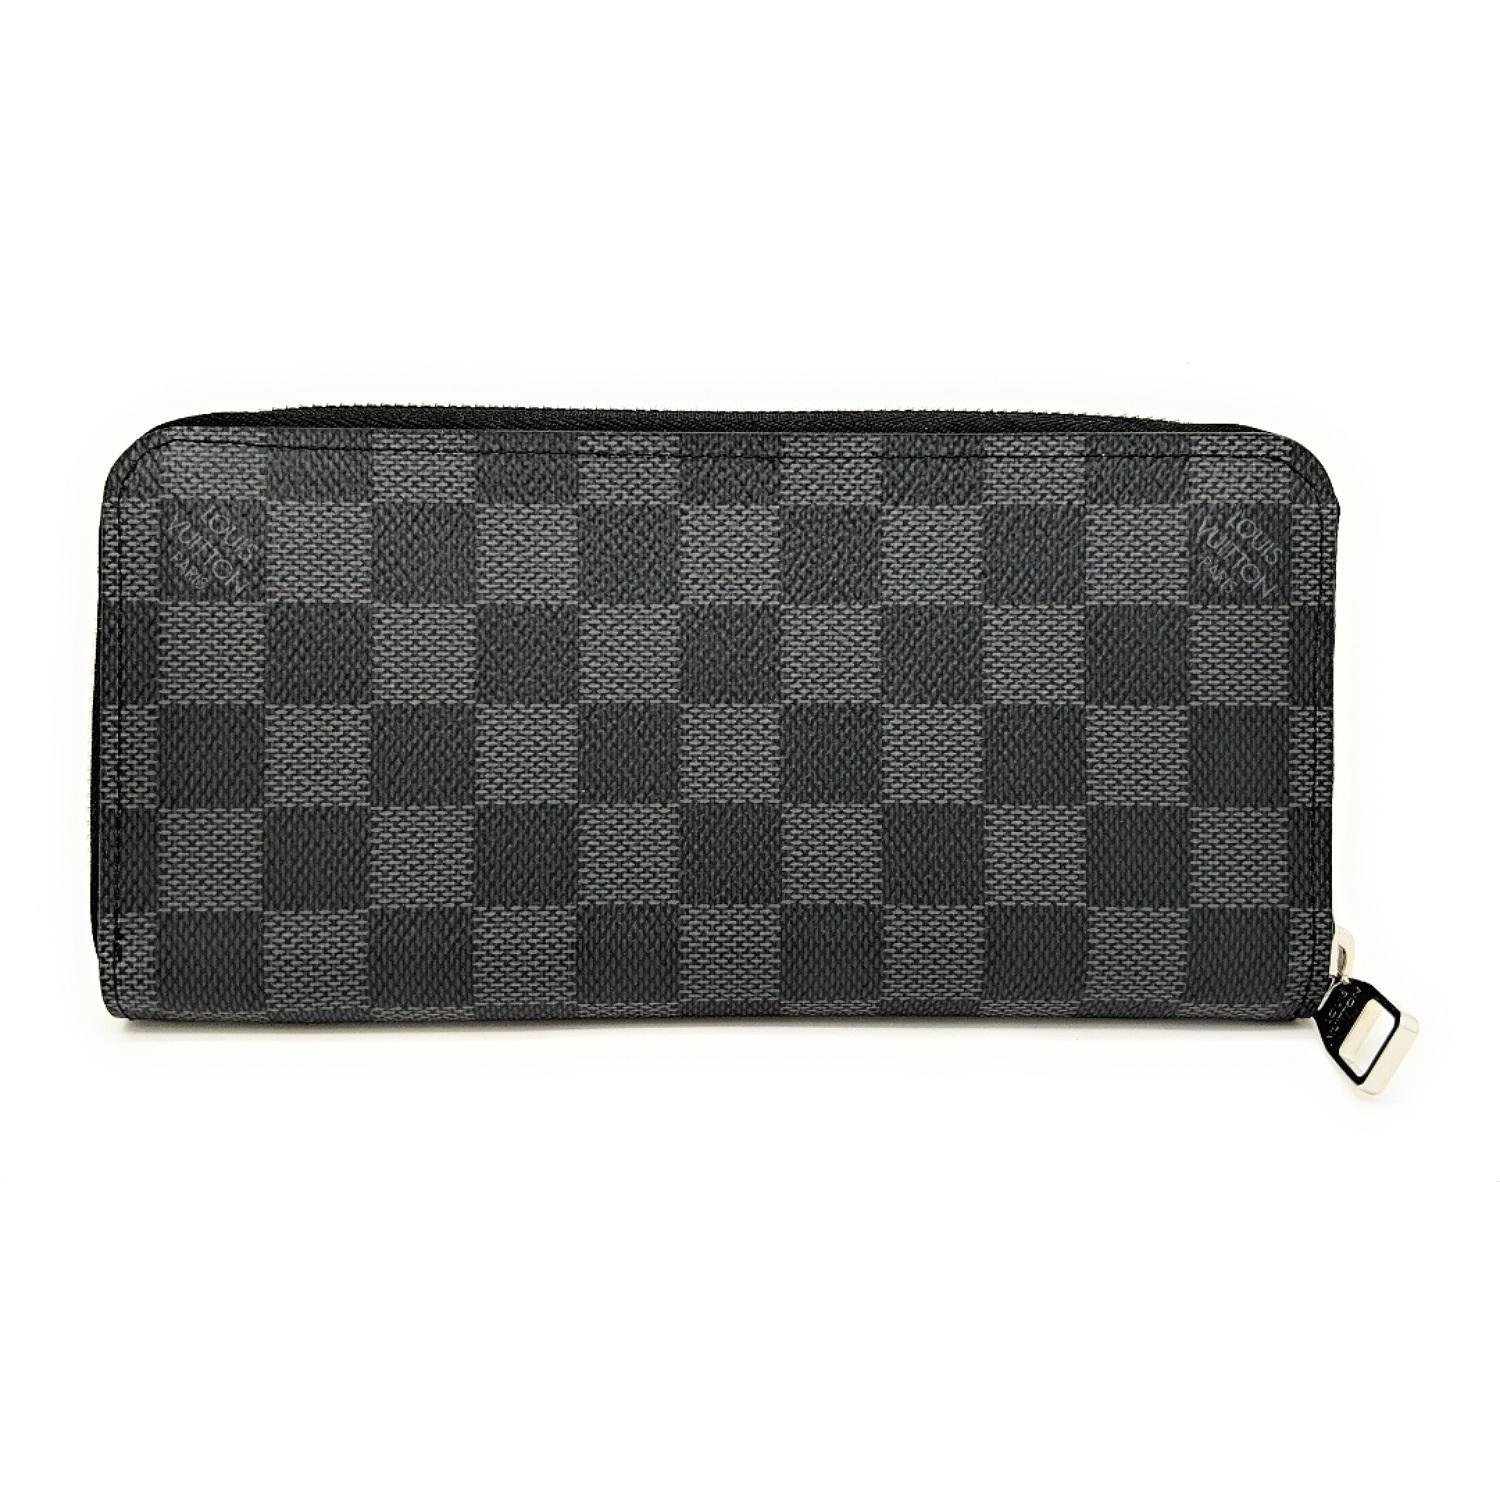 The masculine Zippy Wallet Vertical looks the height of elegance in durable Damier Graphite canvas. With numerous useful pockets and compartments it’s the refined way to carry cash cards and coins. Retail price $830.

Designer: Louis